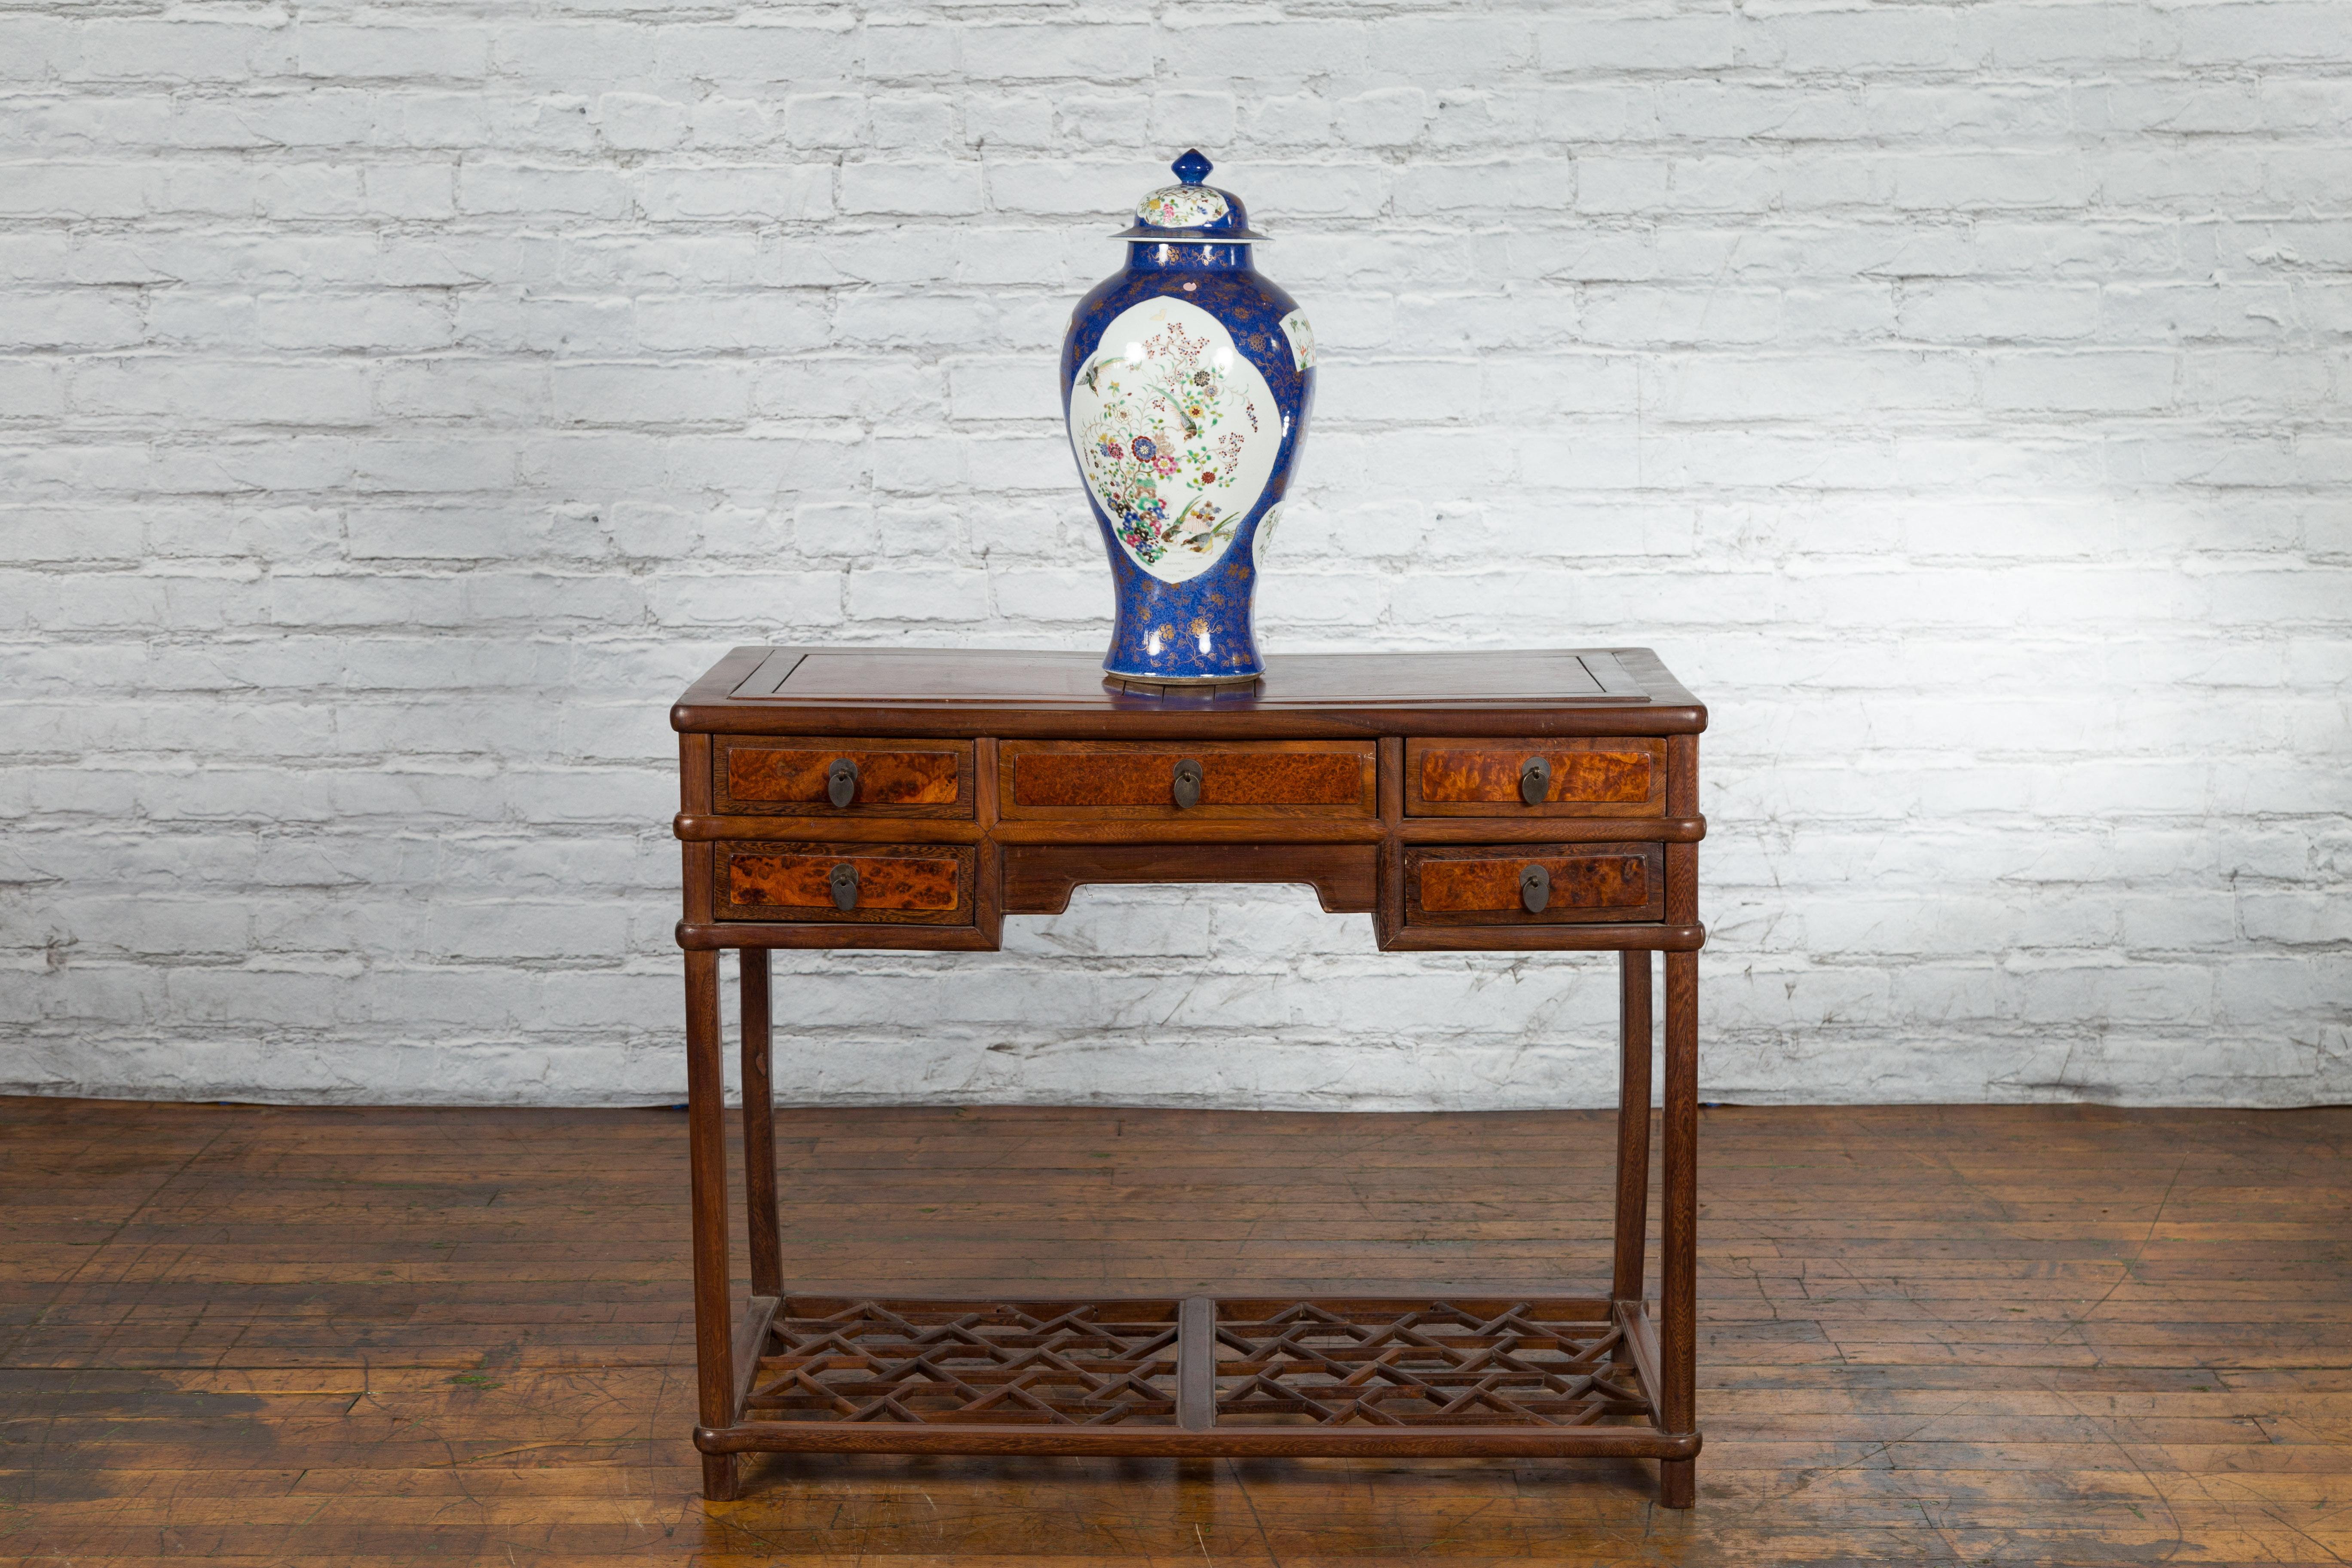 Chinese Qing Dynasty 19th Century Desk with Burlwood Top, Drawers and Cracked Ice Shelf For Sale